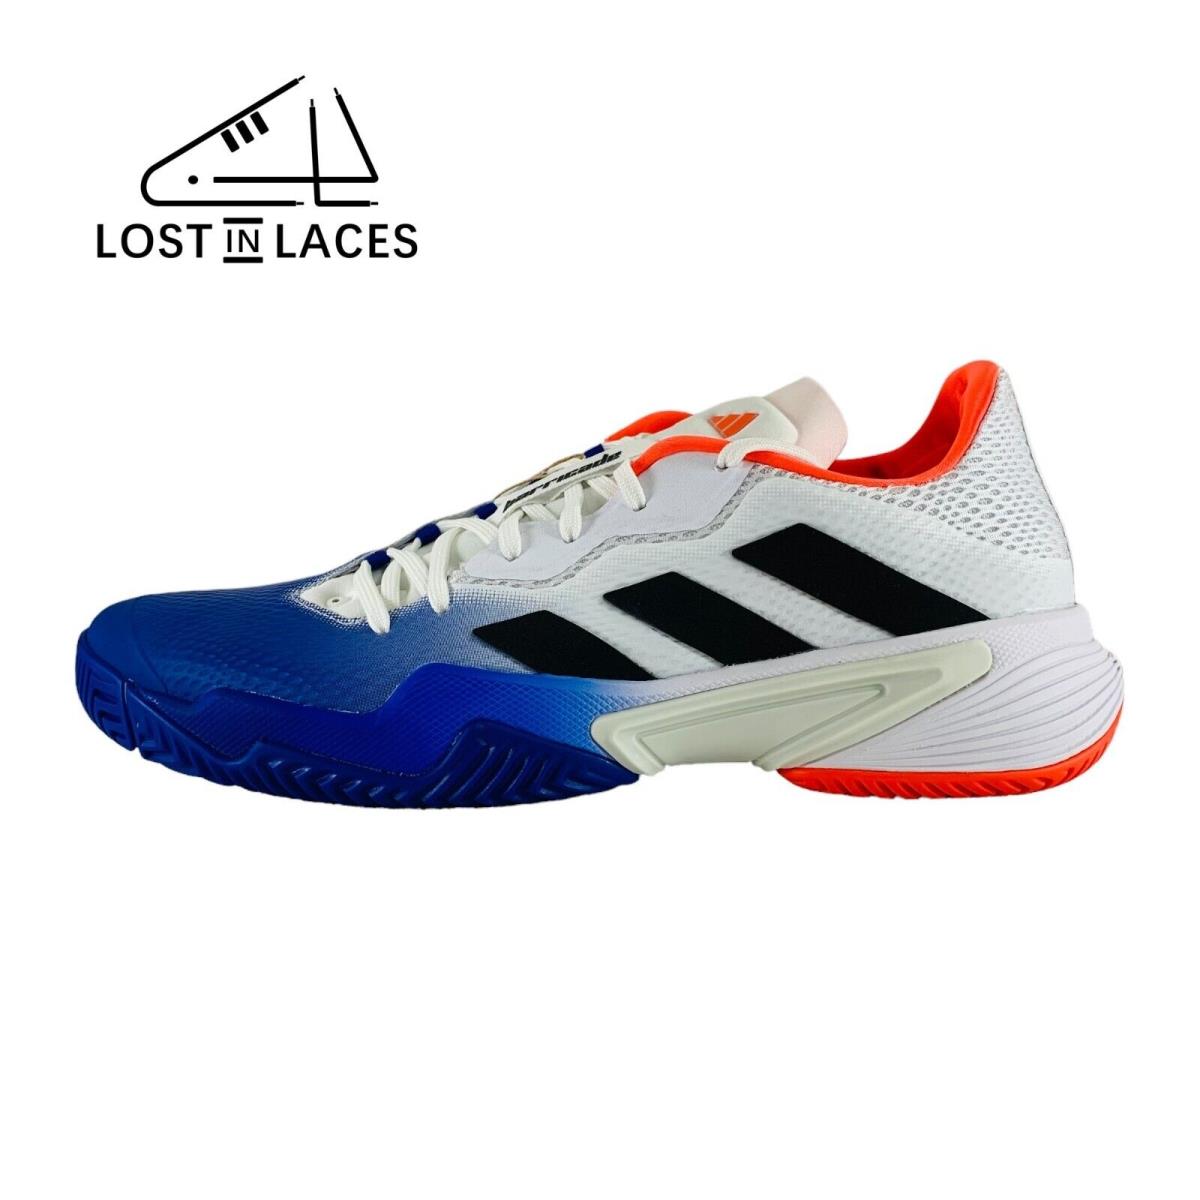 Adidas Barricade White Blue Red Tennis Sneakers Tennis Shoes Men`s Sizes